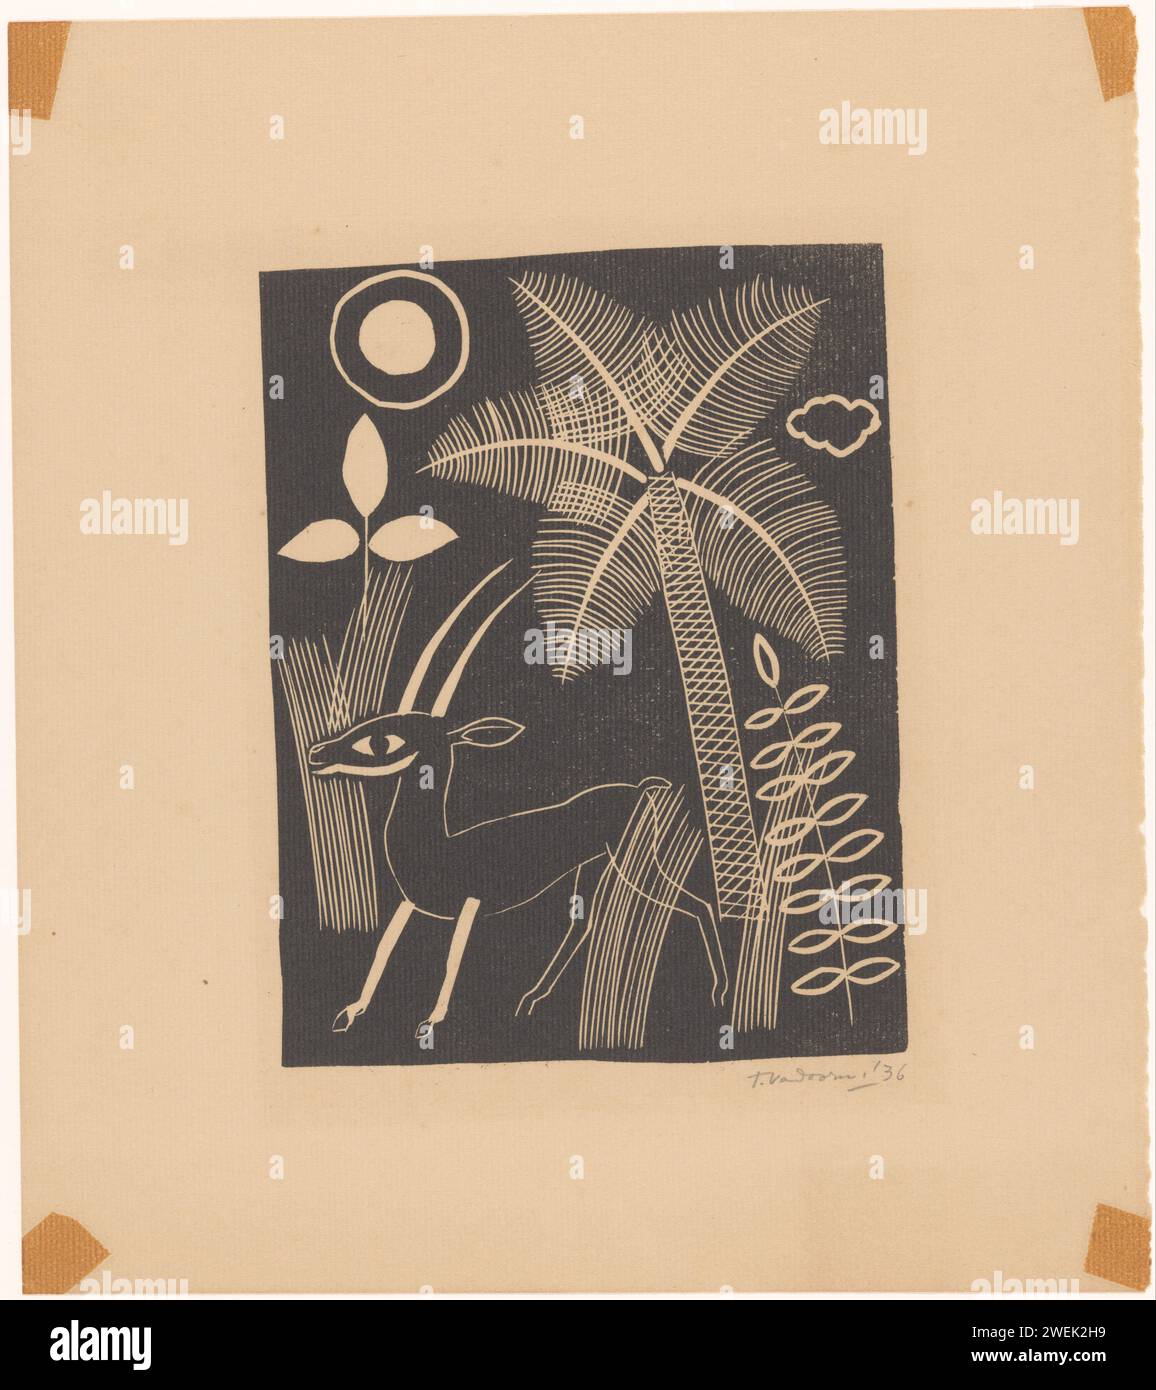 Hert with Palmboom, Tinus van Doorn, 1936 print Composition with a dehy -like animal, a palm tree, grass, leaves and a cloud. At the top left you can see a full moon or a sun.  paper. ink  hoofed animals: deer. trees: palm-tree Stock Photo